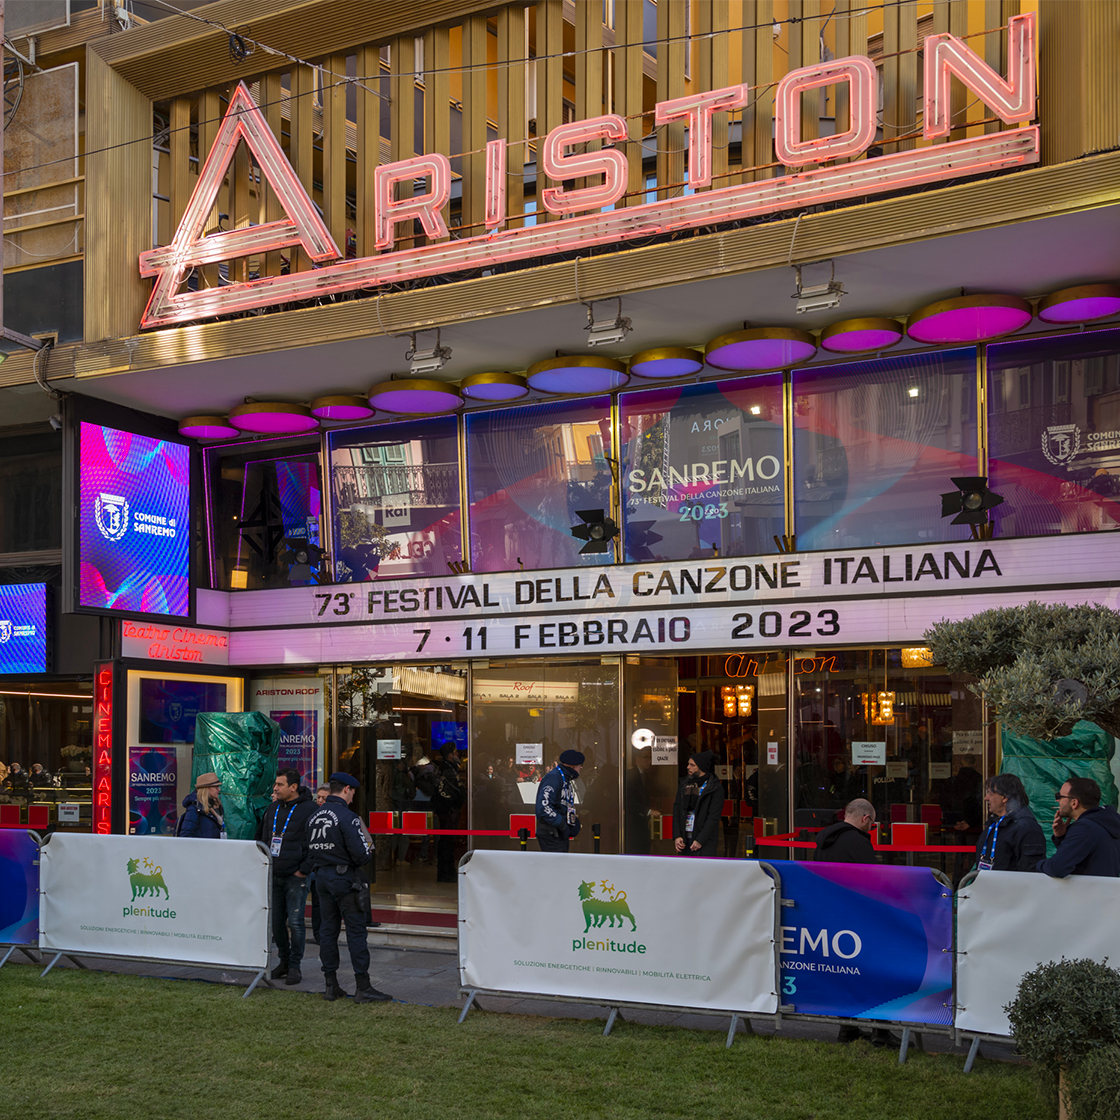 Picture of the facade of the Ariston theatre. There is a neon sign saying “Ariston” and below it another sign saying in Italian: “73th festival of Italian songs, 7-13 February 2023”. 